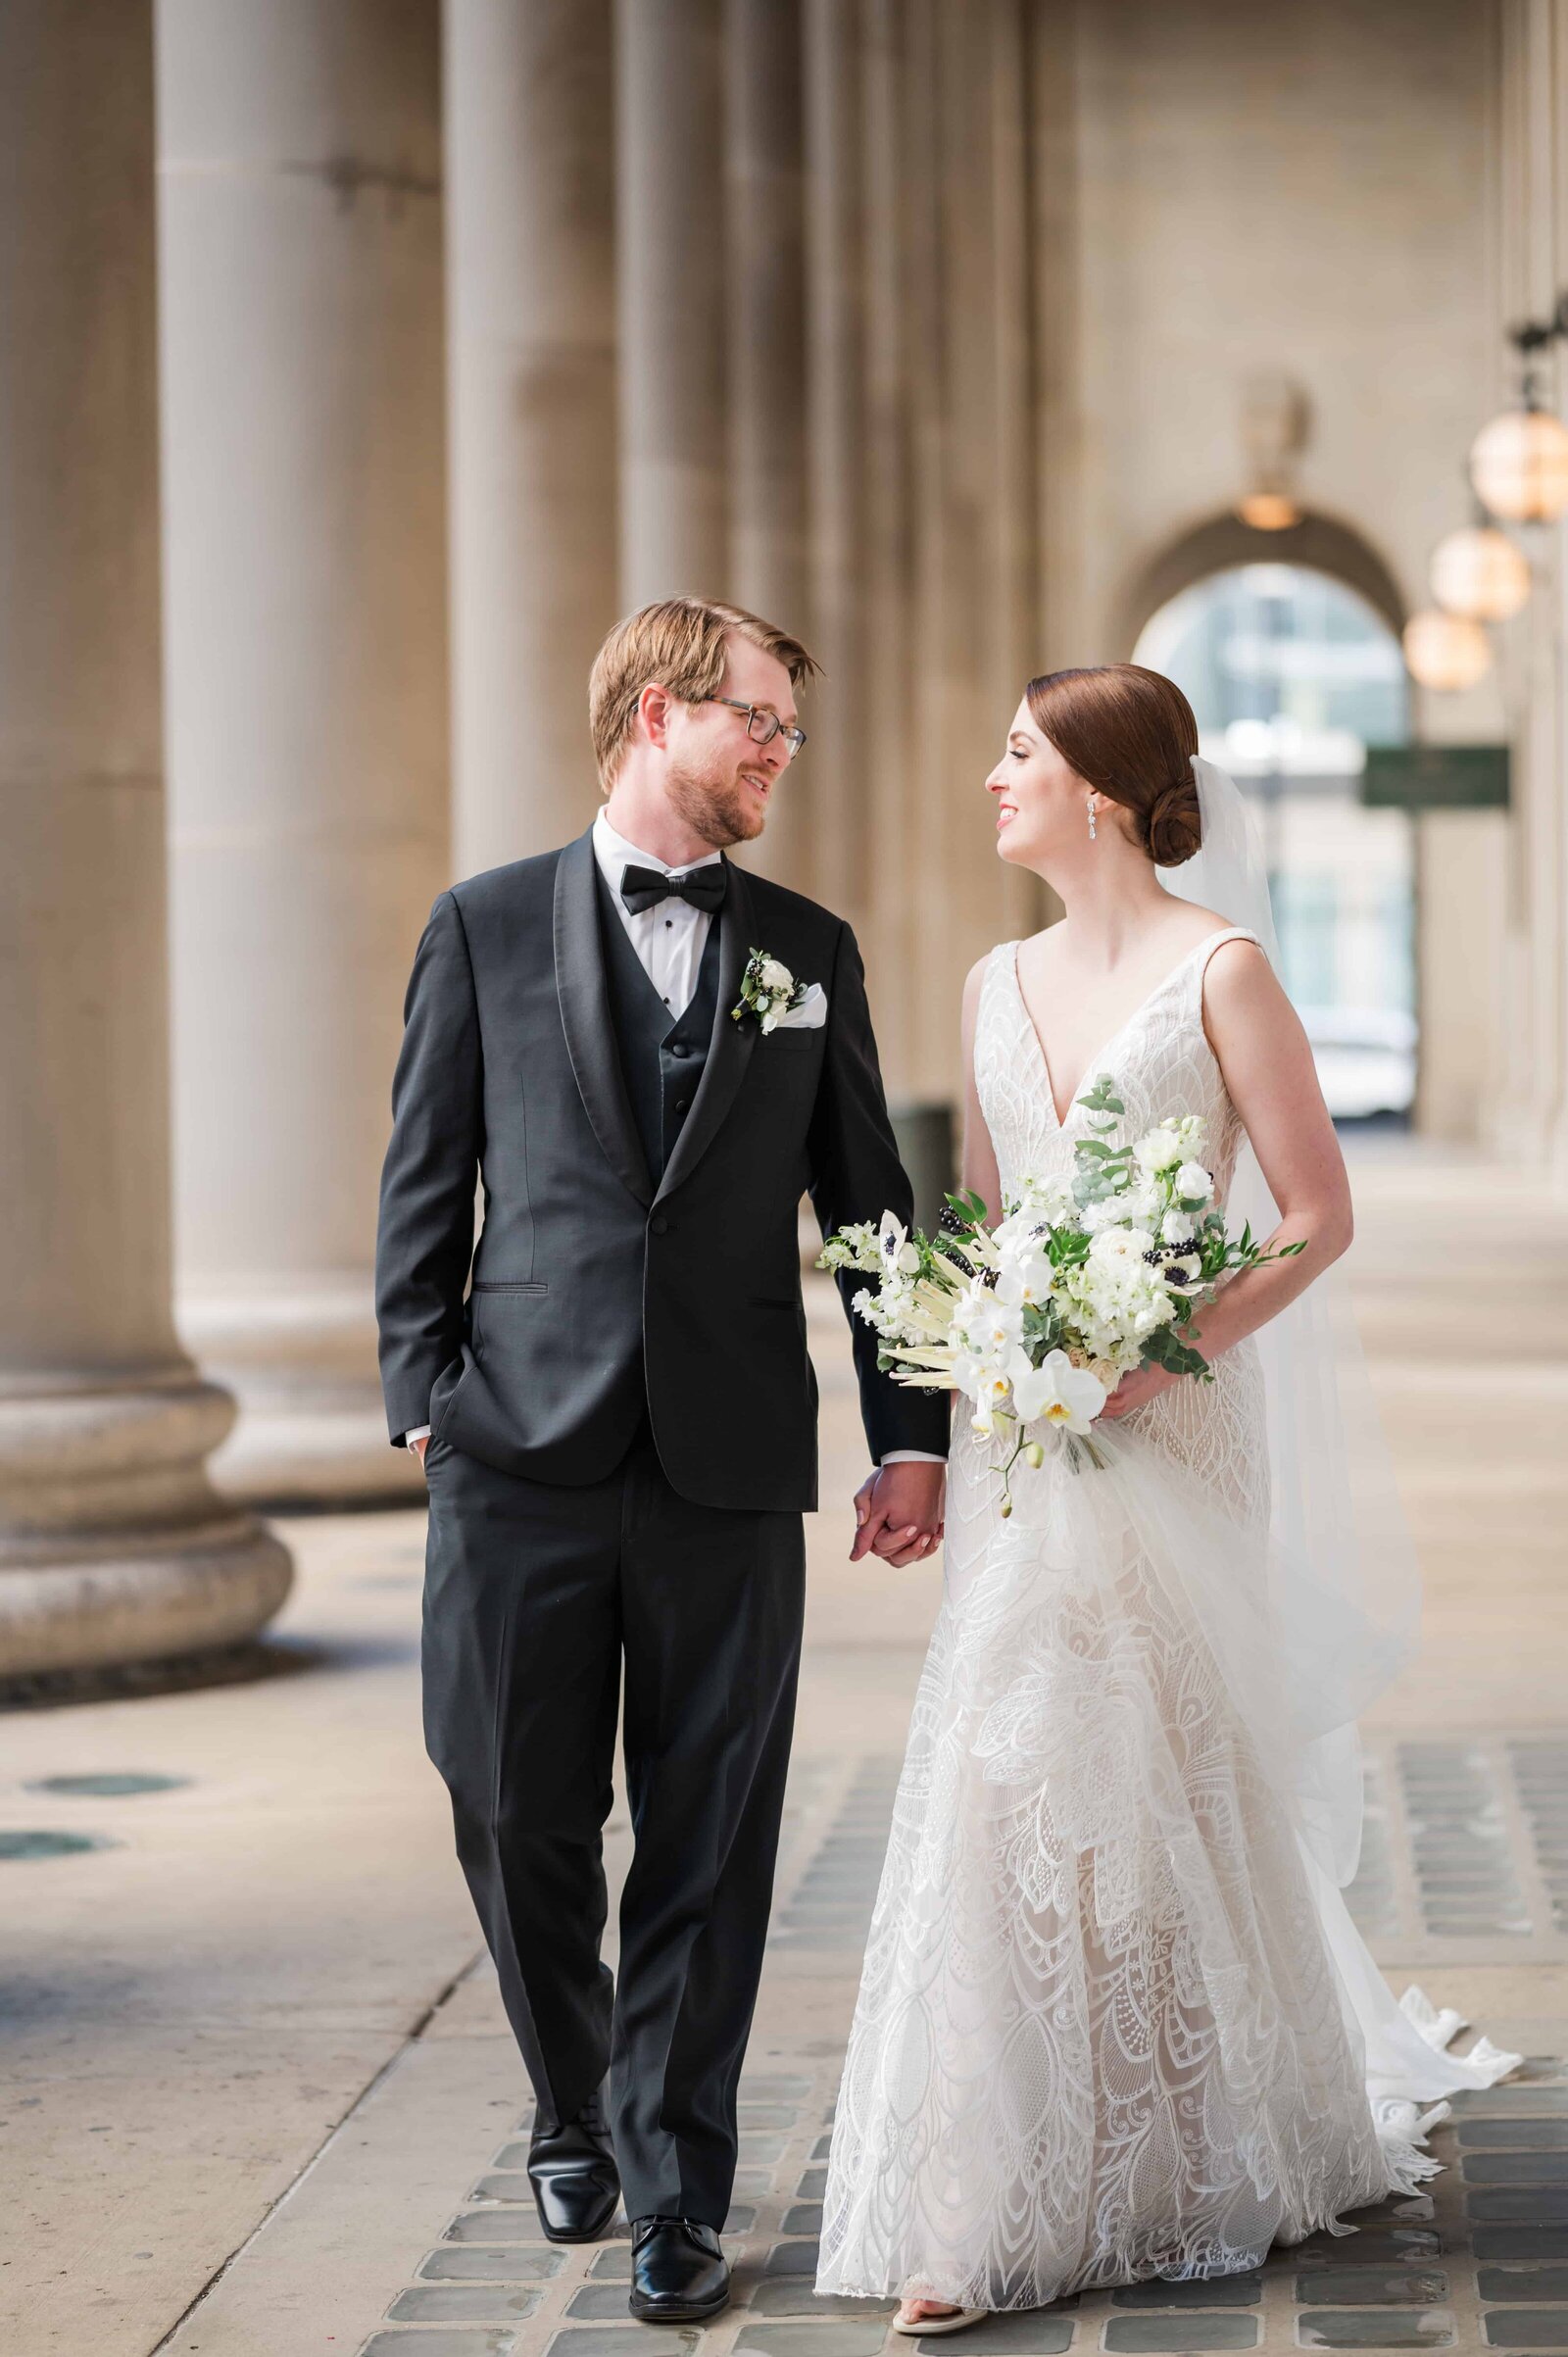 Bride and groom portrait at Chicago union station.